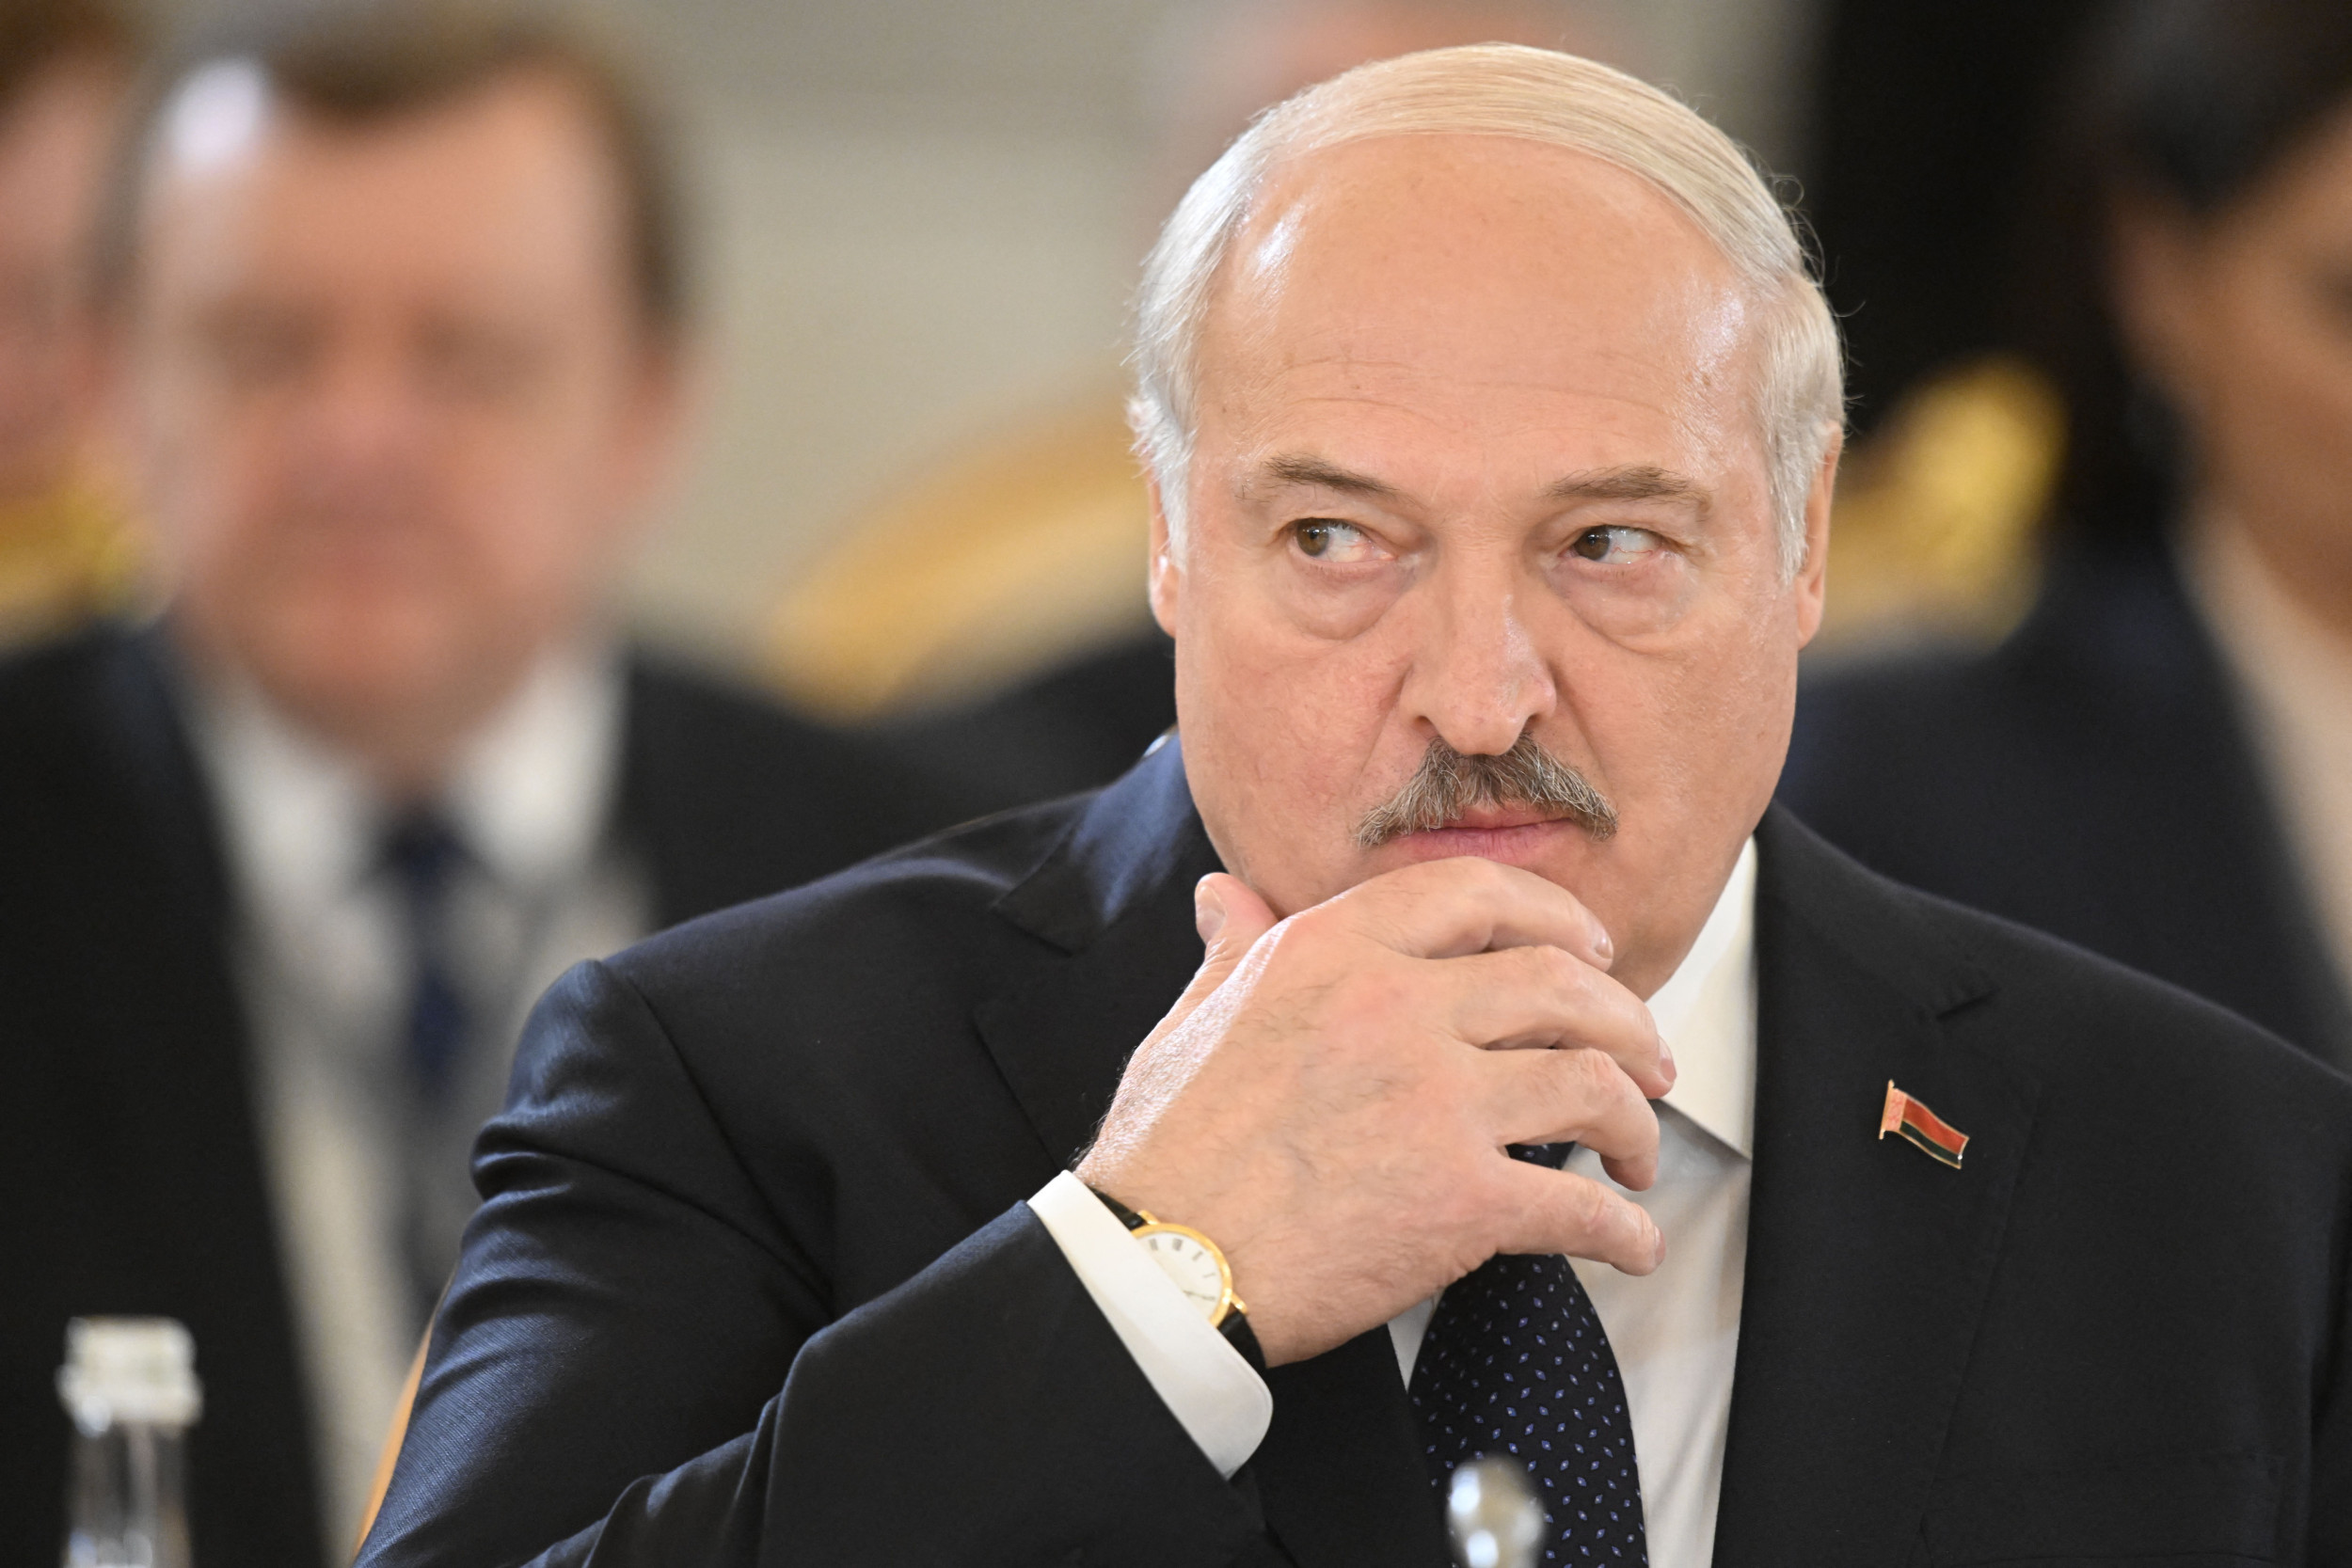 Belarus has independent control of nuclear weapons, Lukashenko suggests